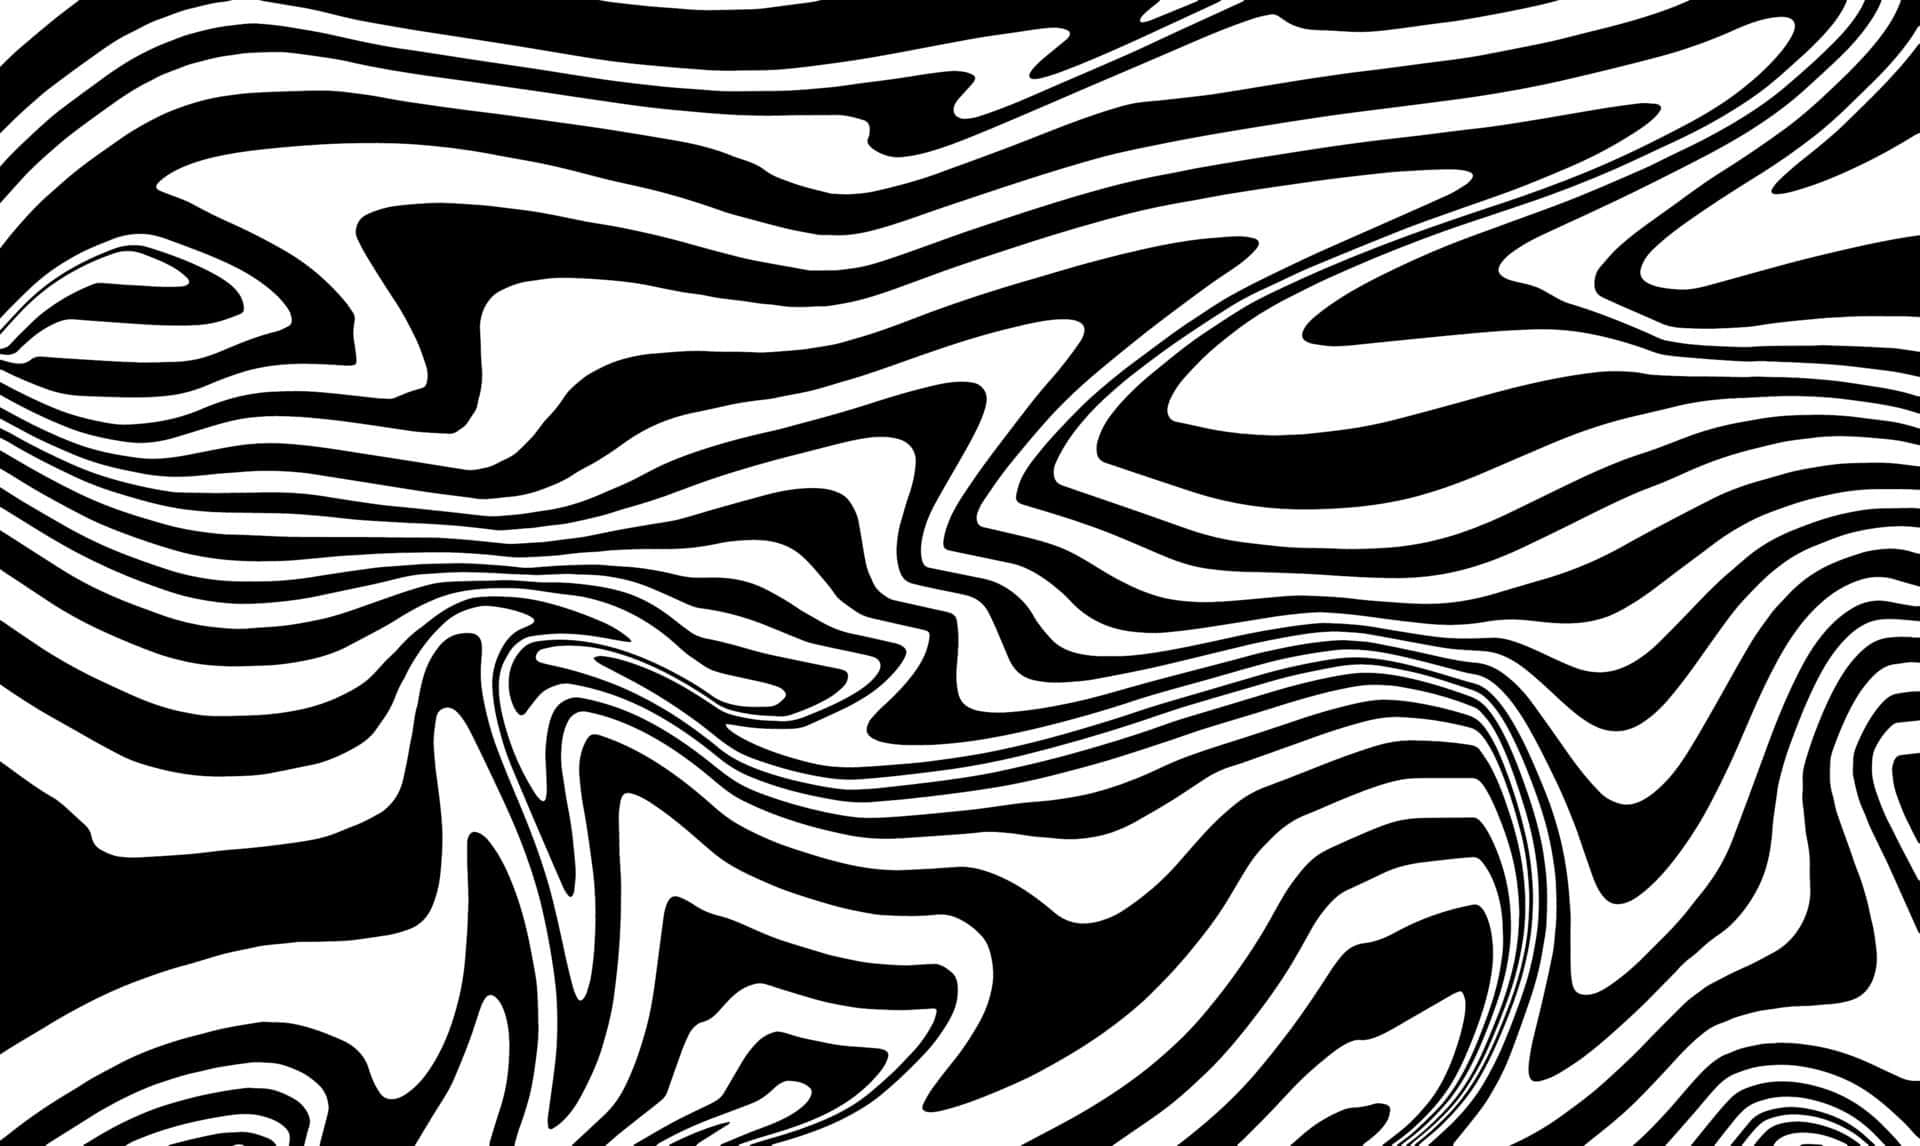 Mesmerizing Black and White Abstract Art Wallpaper